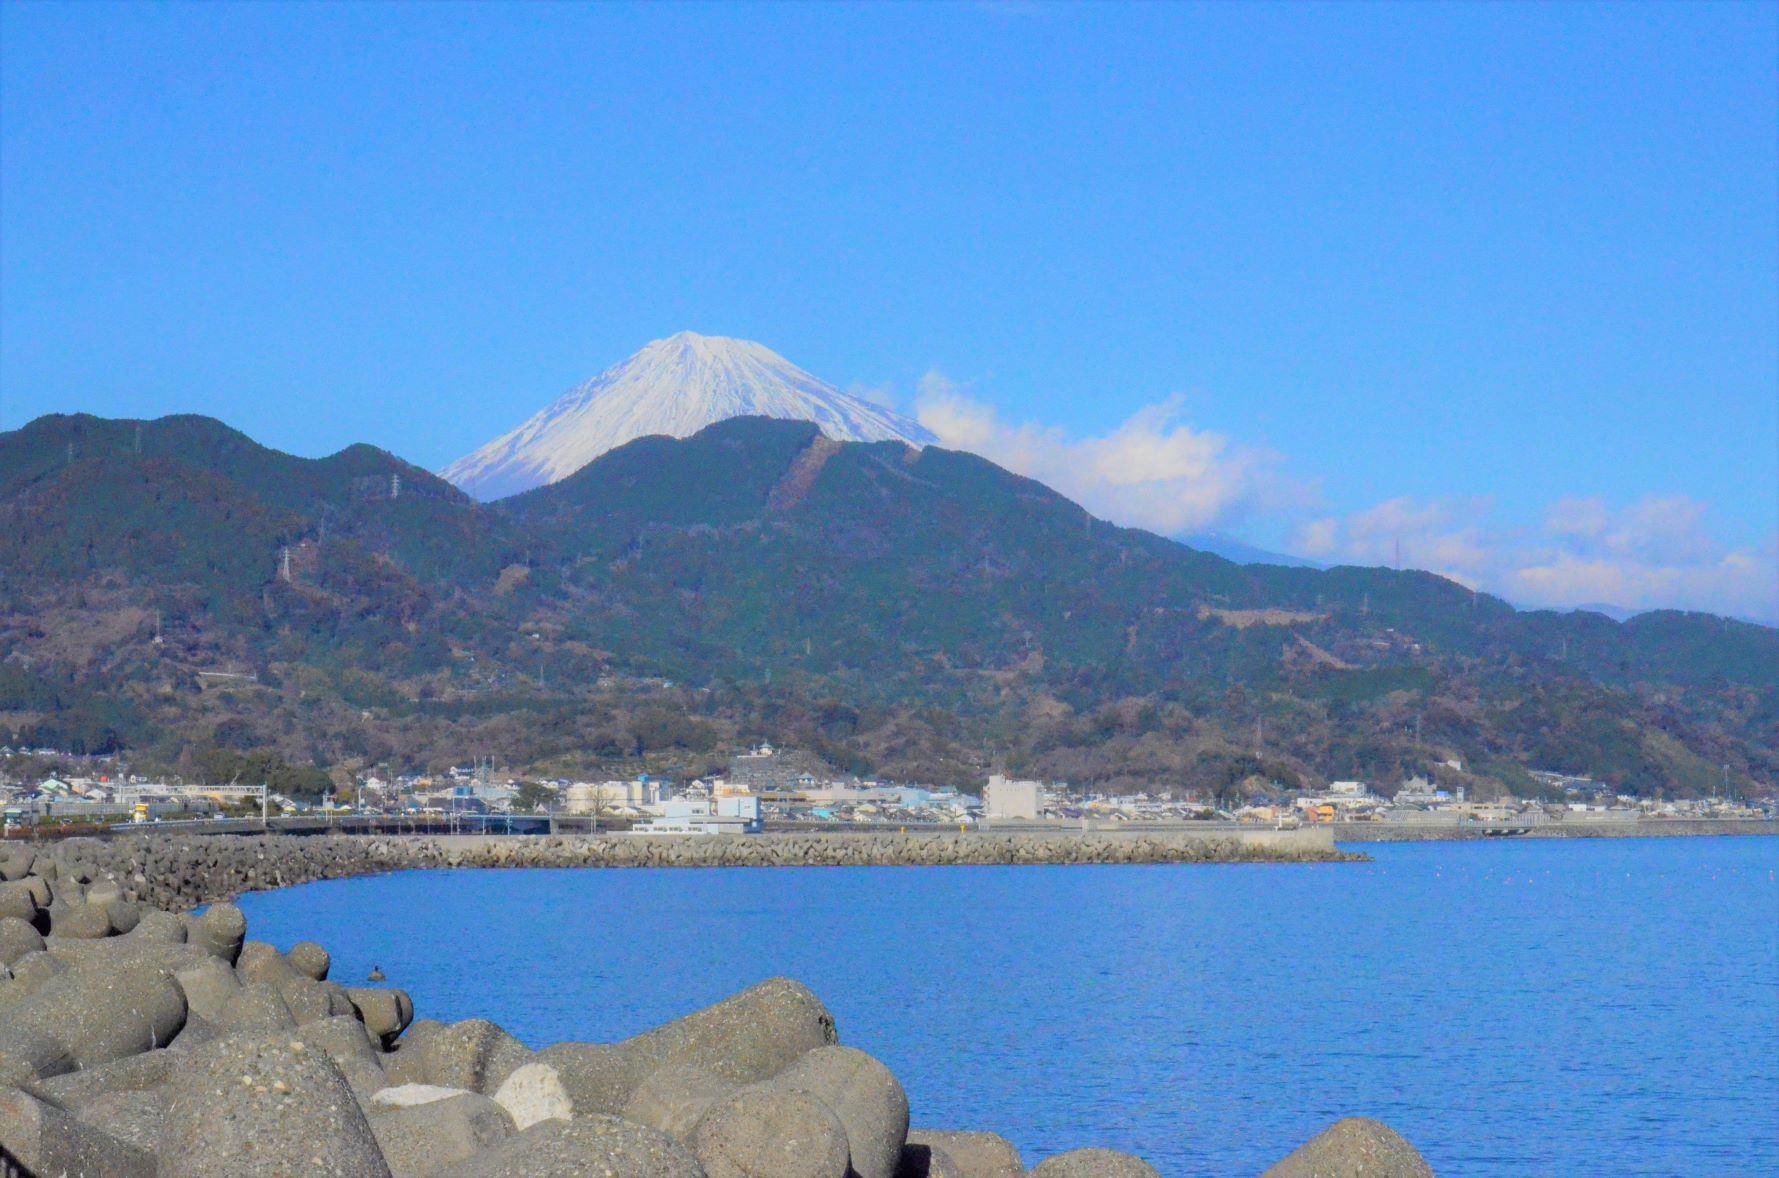 Mt. Fuji seen from the Yui parking area